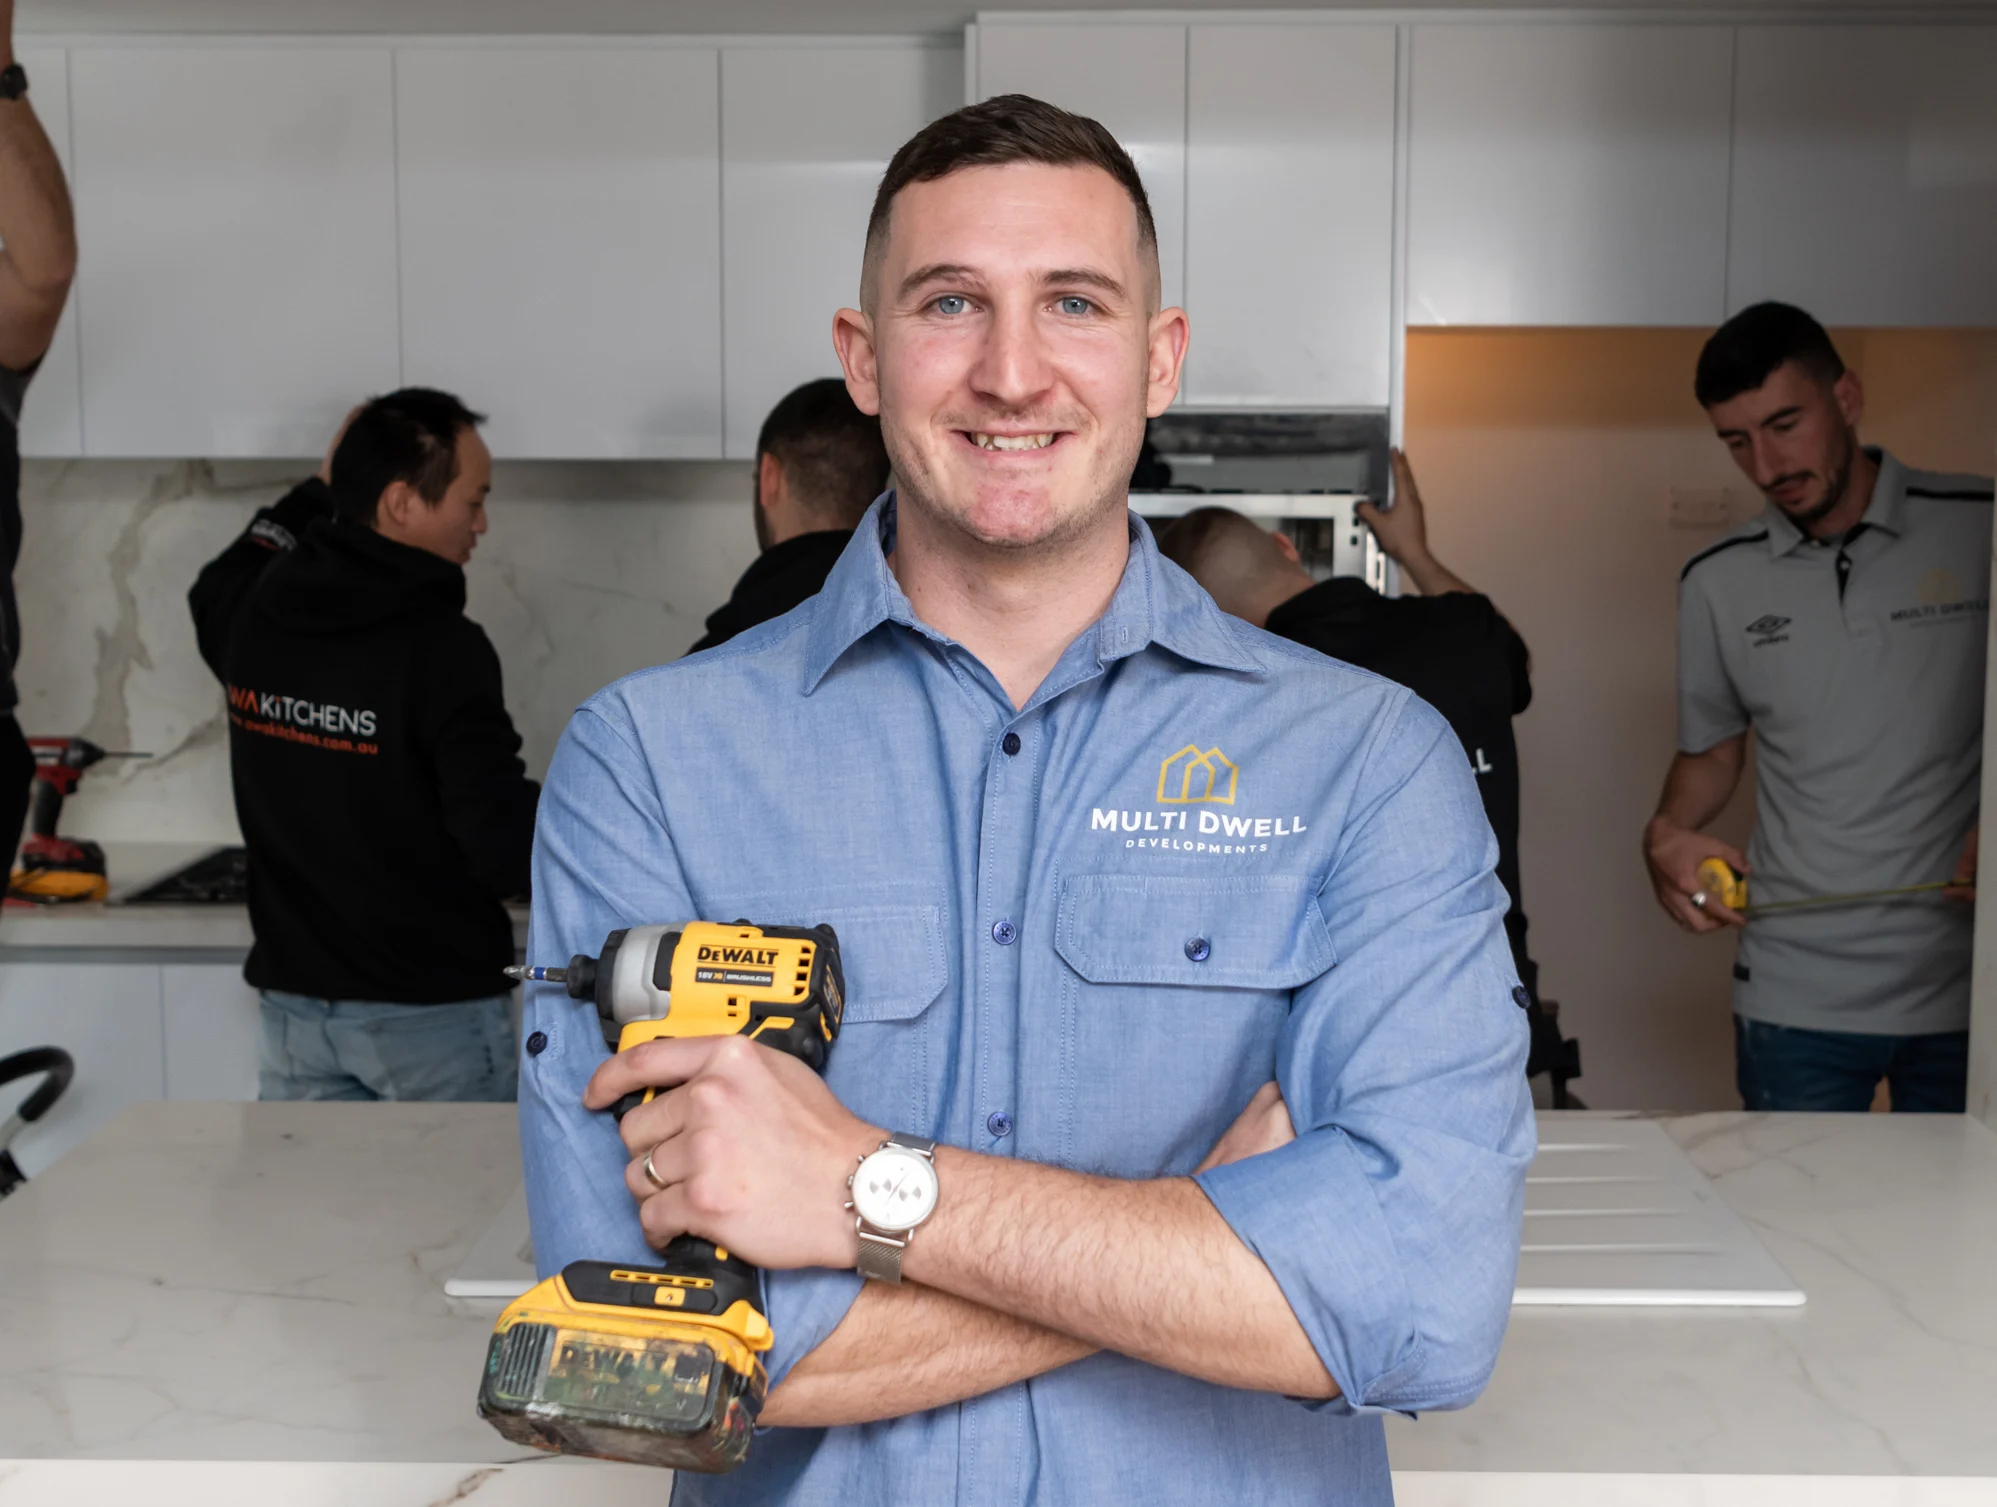 Jason Samargis, owner of Multi Dwell Developments, stands in a kitchen on a worksite. He has a big smile on his face and is holding a DeWalt drill.